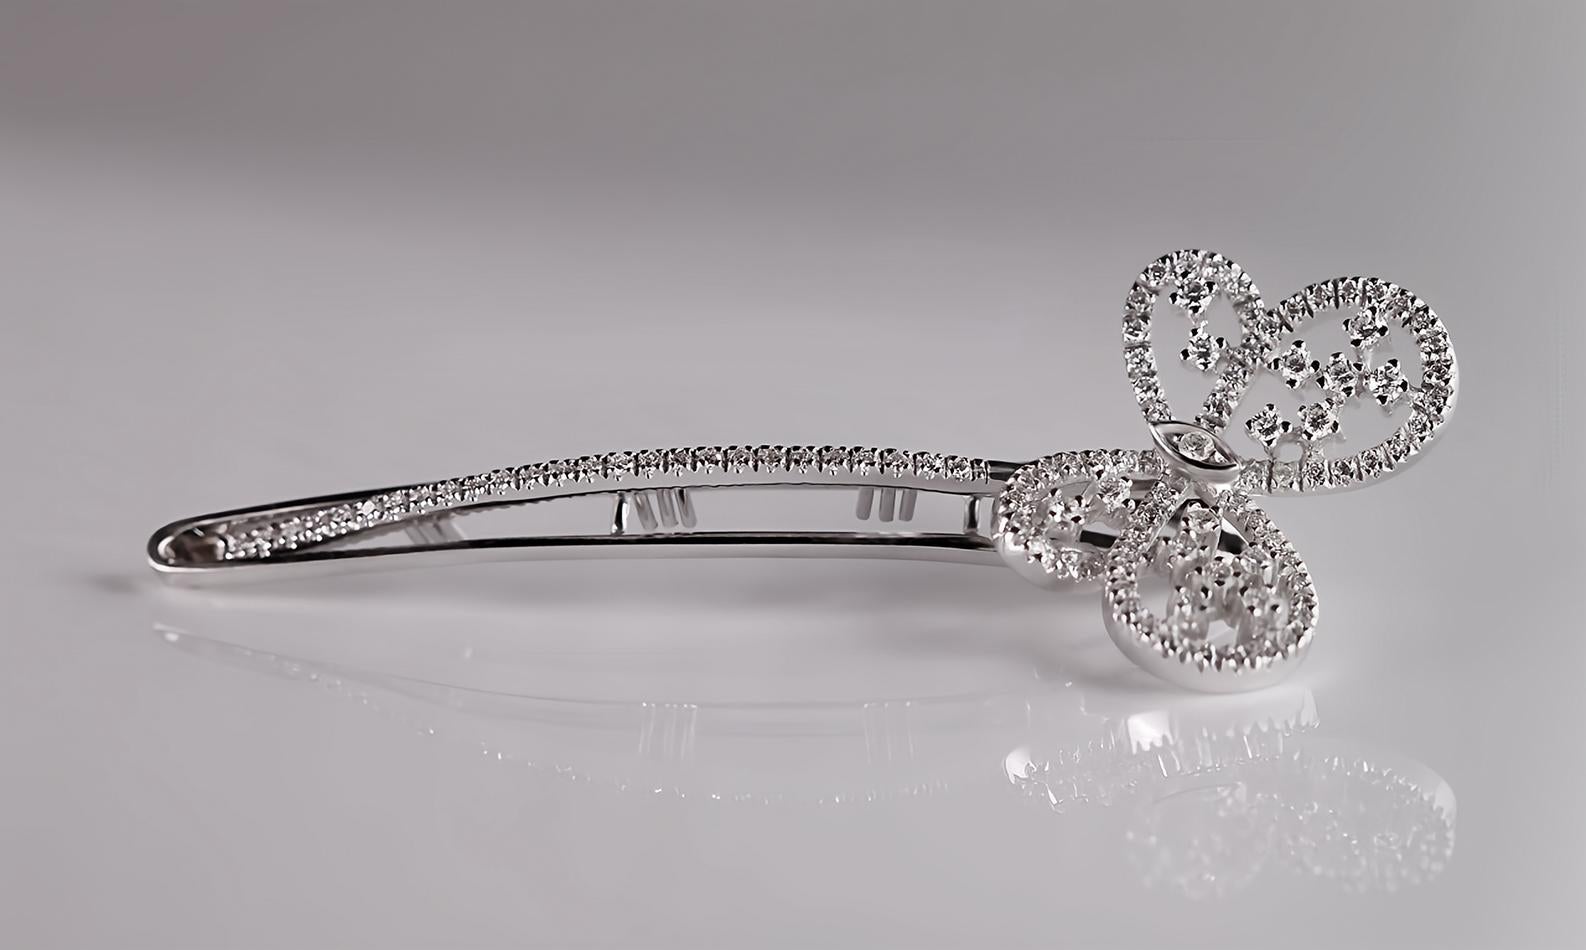 In this hairpin, the essence of purity is manifested in 18kt white gold, chosen for its timeless elegance and crafted to create a uniquely discreet yet exclusive design. 

The row of natural diamonds delicately adorning the upper part introduces a